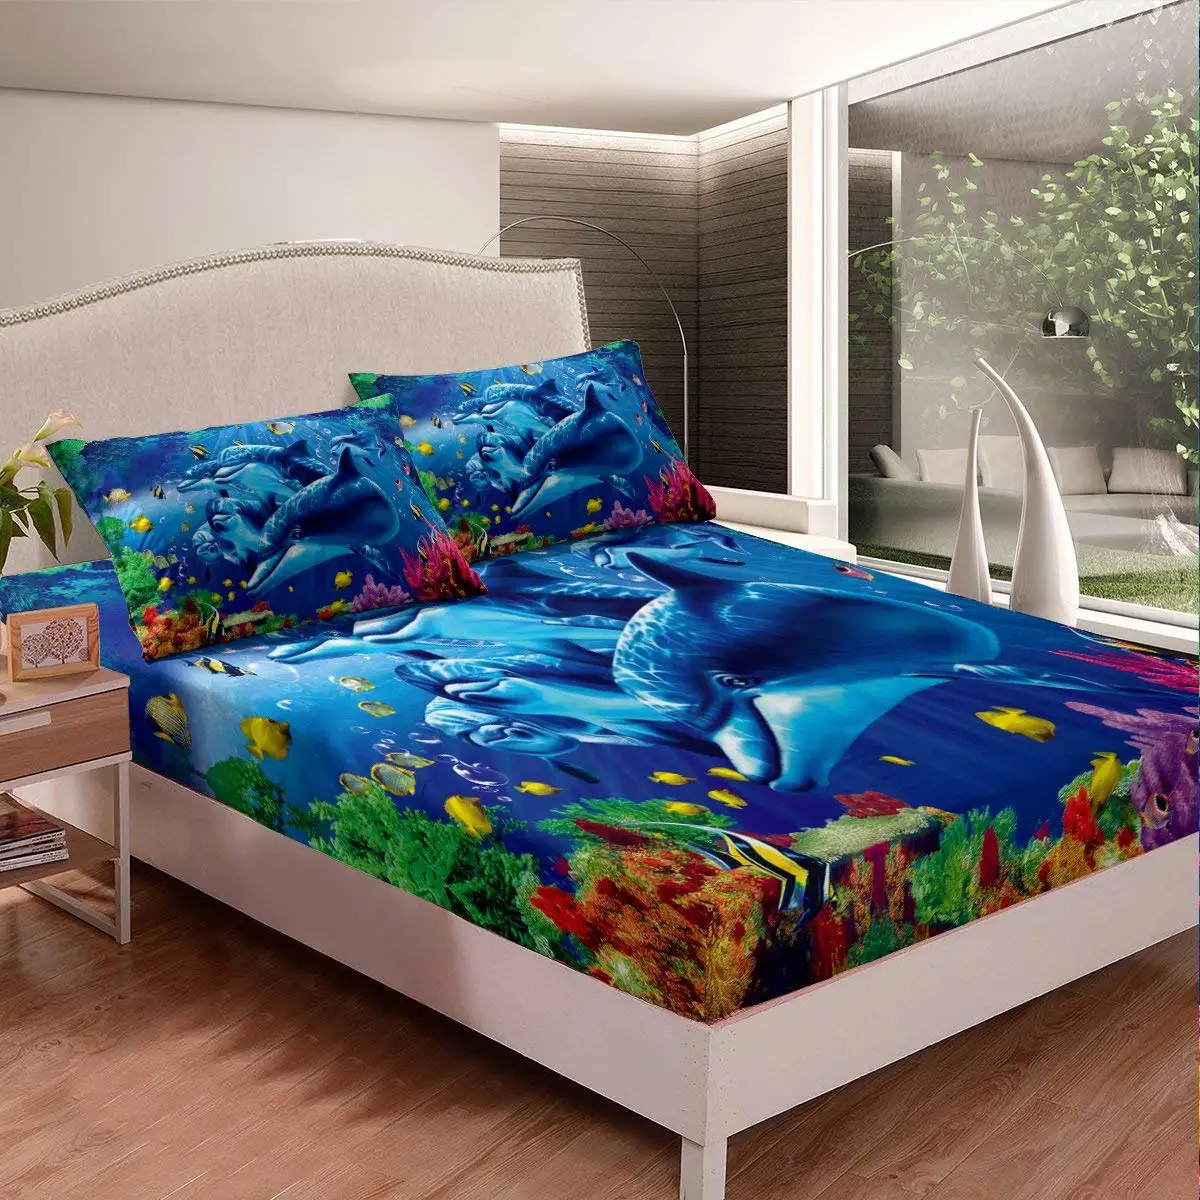 

Dolphin Fitted Sheet Colorful Fish Bed Cover Seaweed Reef Sheet Set, Underwater World Bedding Set Sealife Themed Bedspread